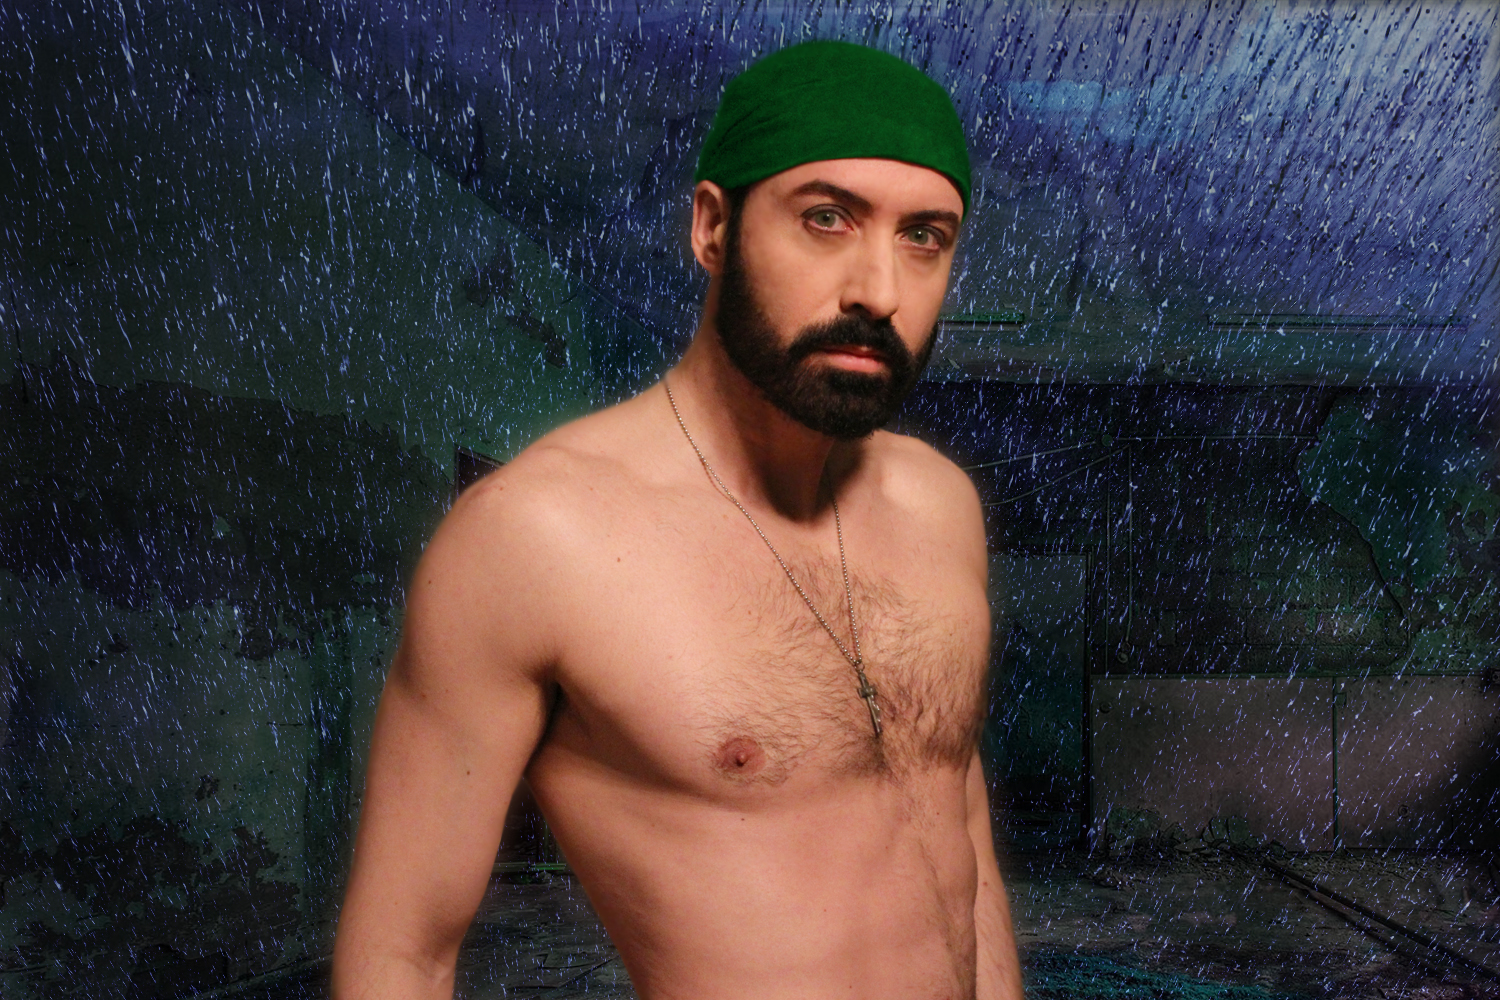 Rain or shine, nothing will stop me in 2015, just wait and see... #FollowYourDream #ComingIn2015 #NewSeason #RealityShow #MoonDazeTV #Beard #LifeIsGood